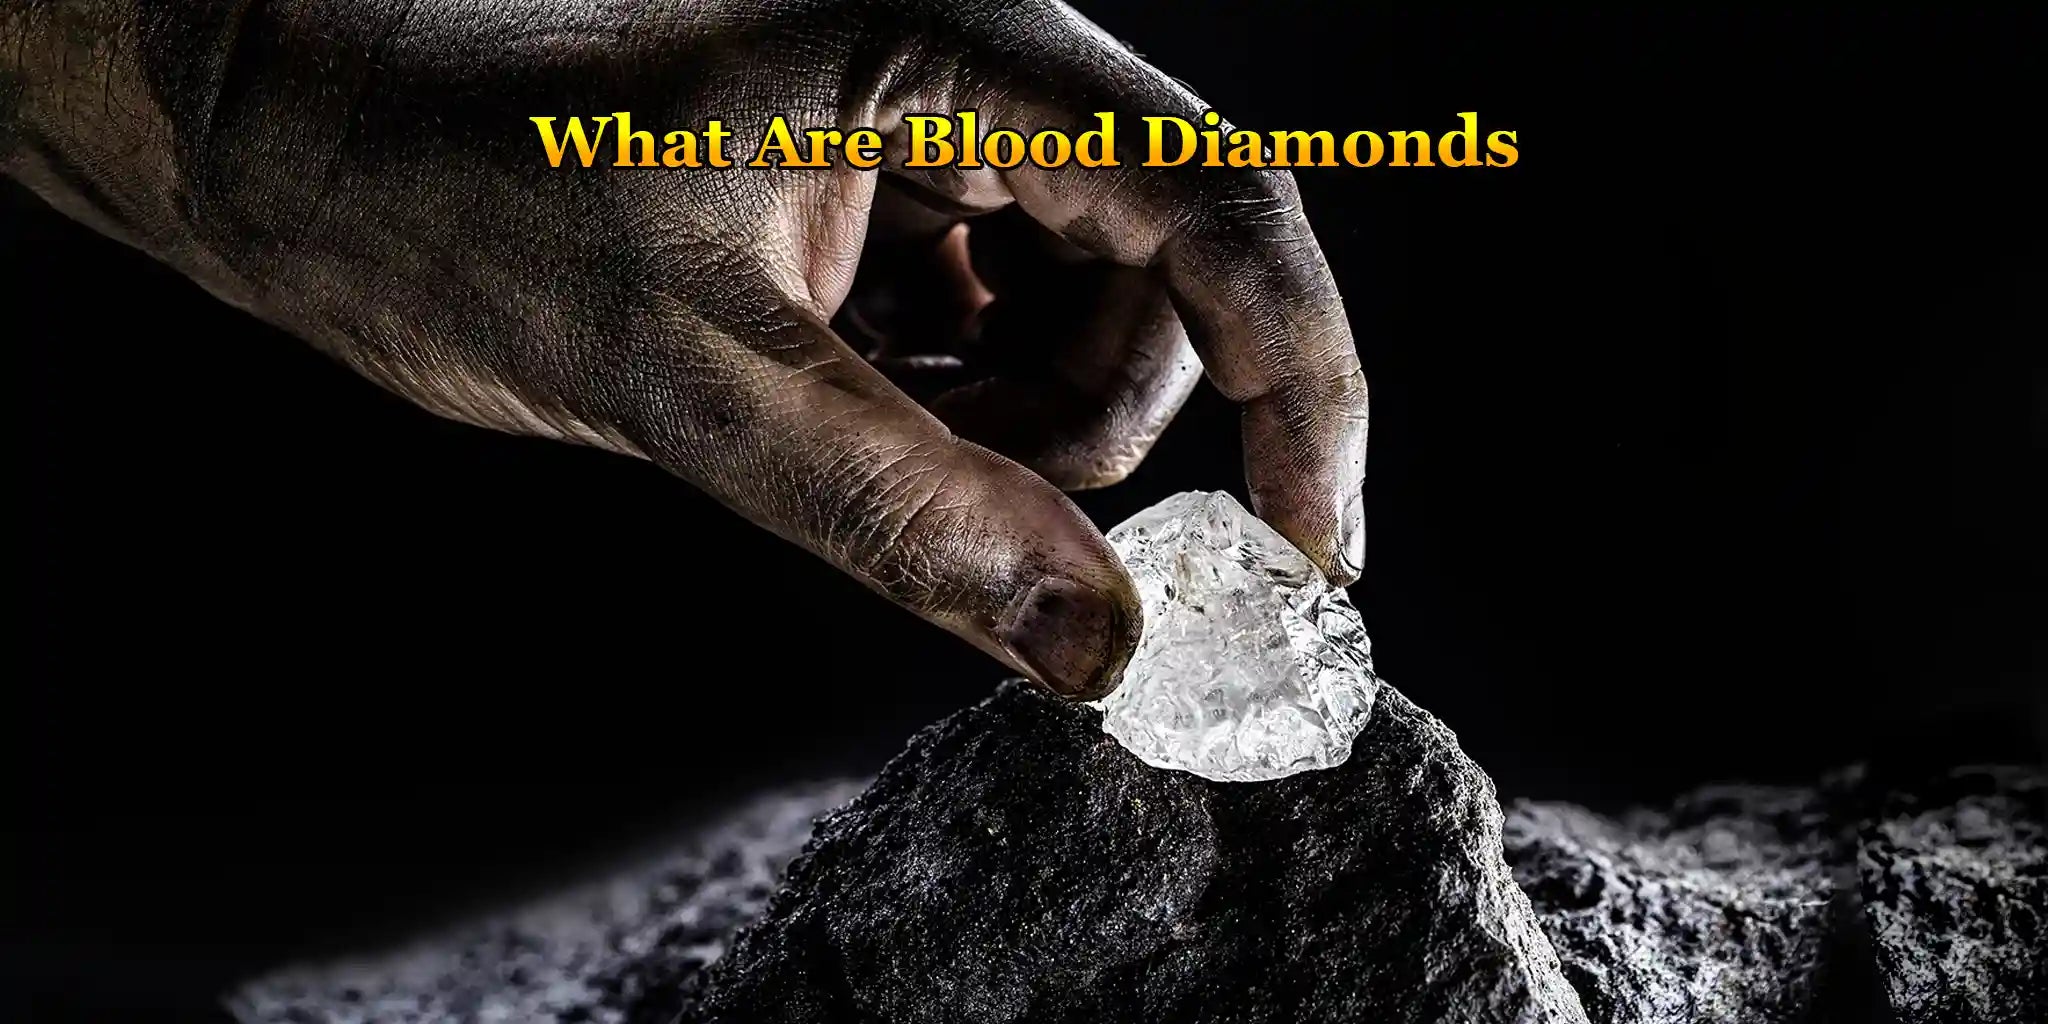 What Is a Blood Diamond?